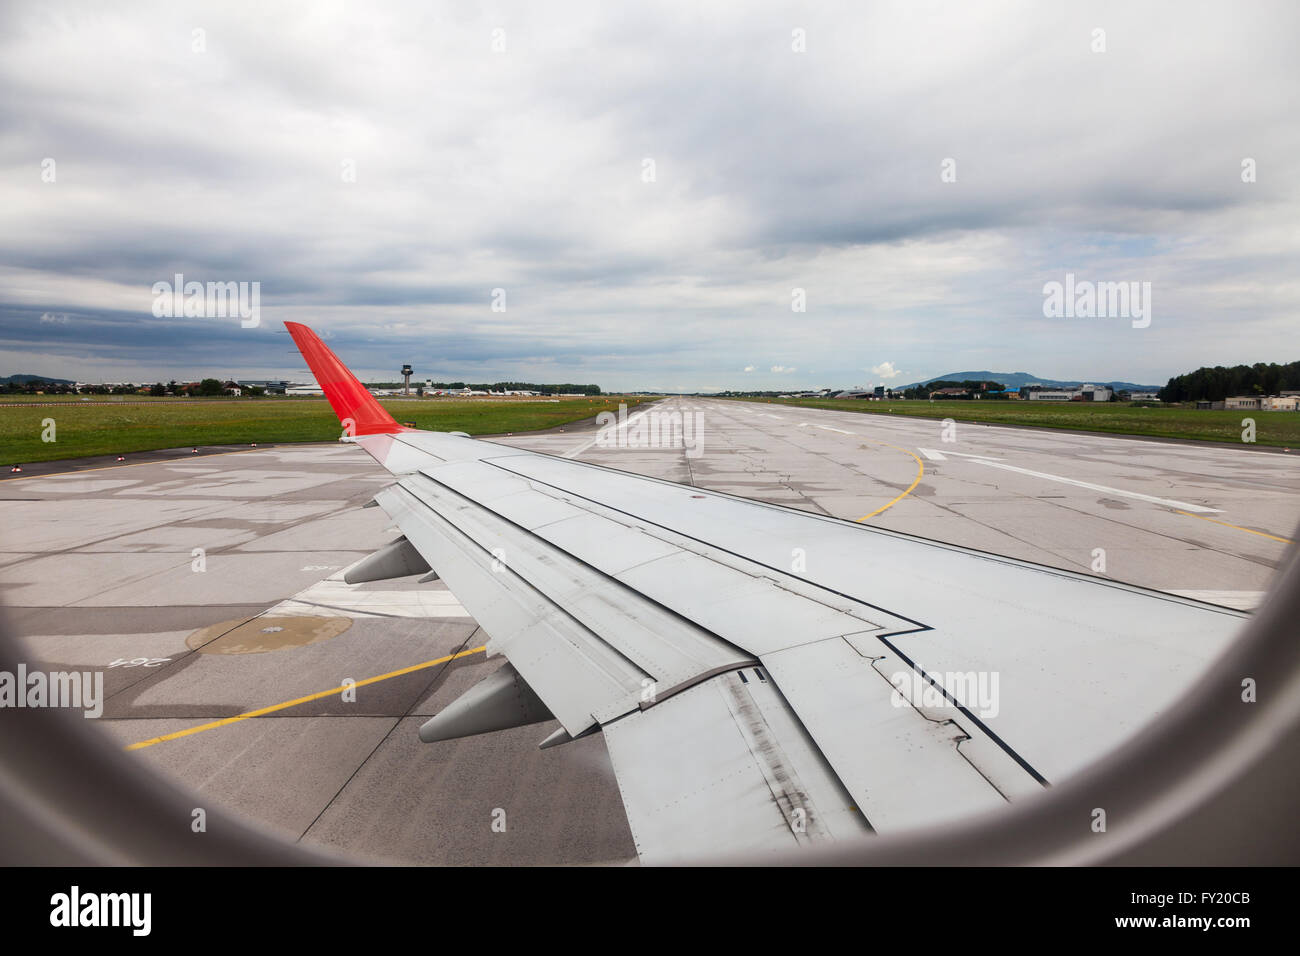 Looking through an airplane window at the runway taxiing on takeoff at Salzburg airport Salzburg Austria Europe Stock Photo